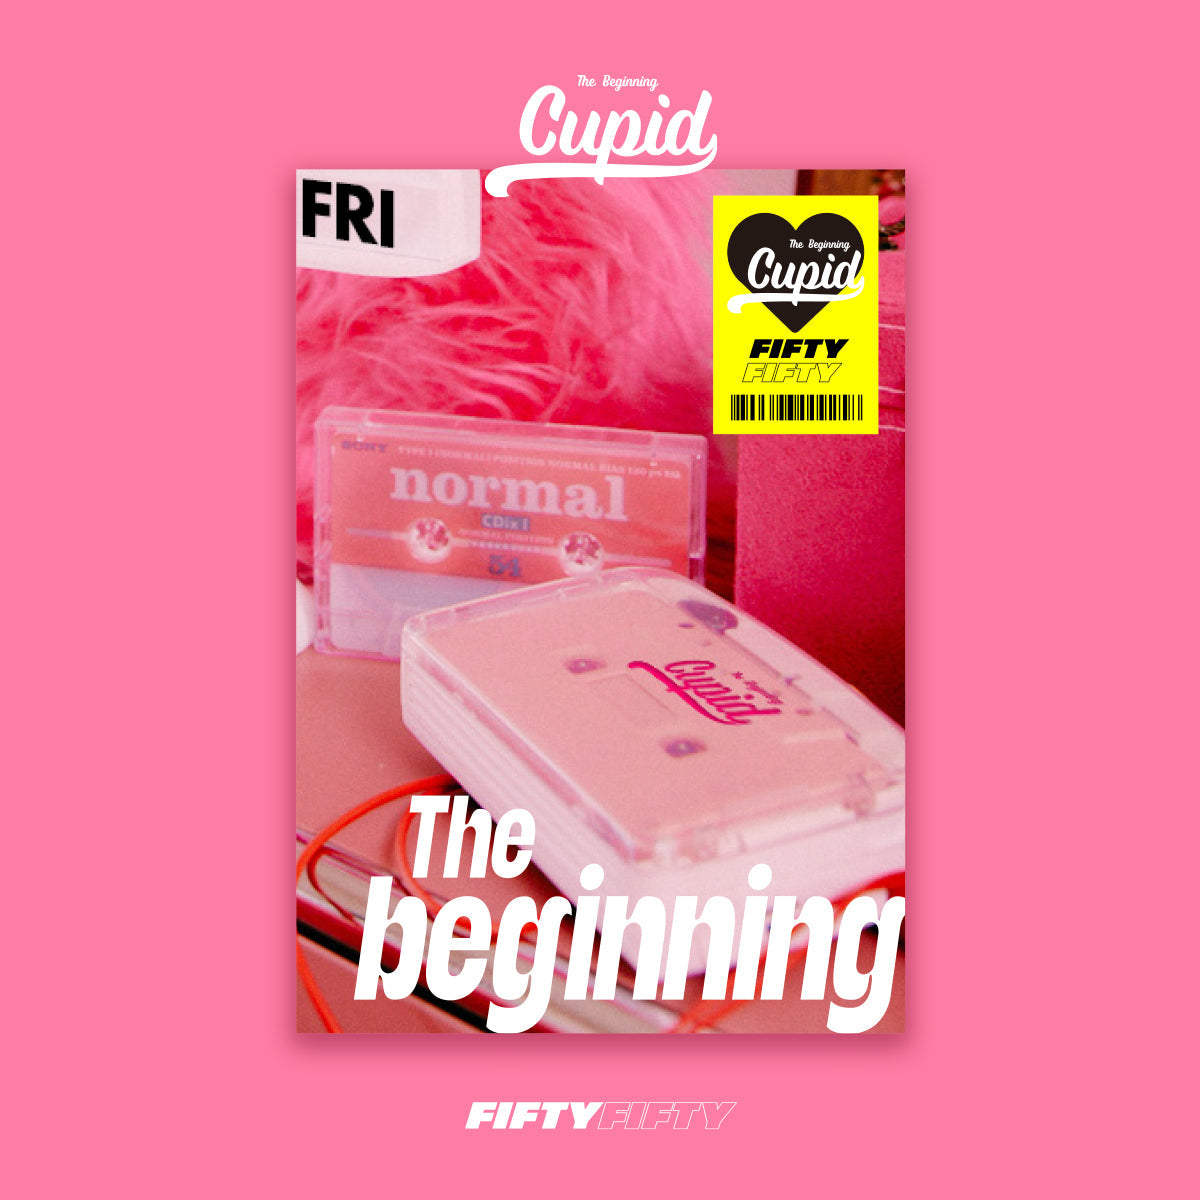 FIFTY FIFTY 1ST SINGLE ALBUM 'THE BEGINNING: CUPID' NERD VERSION COVER